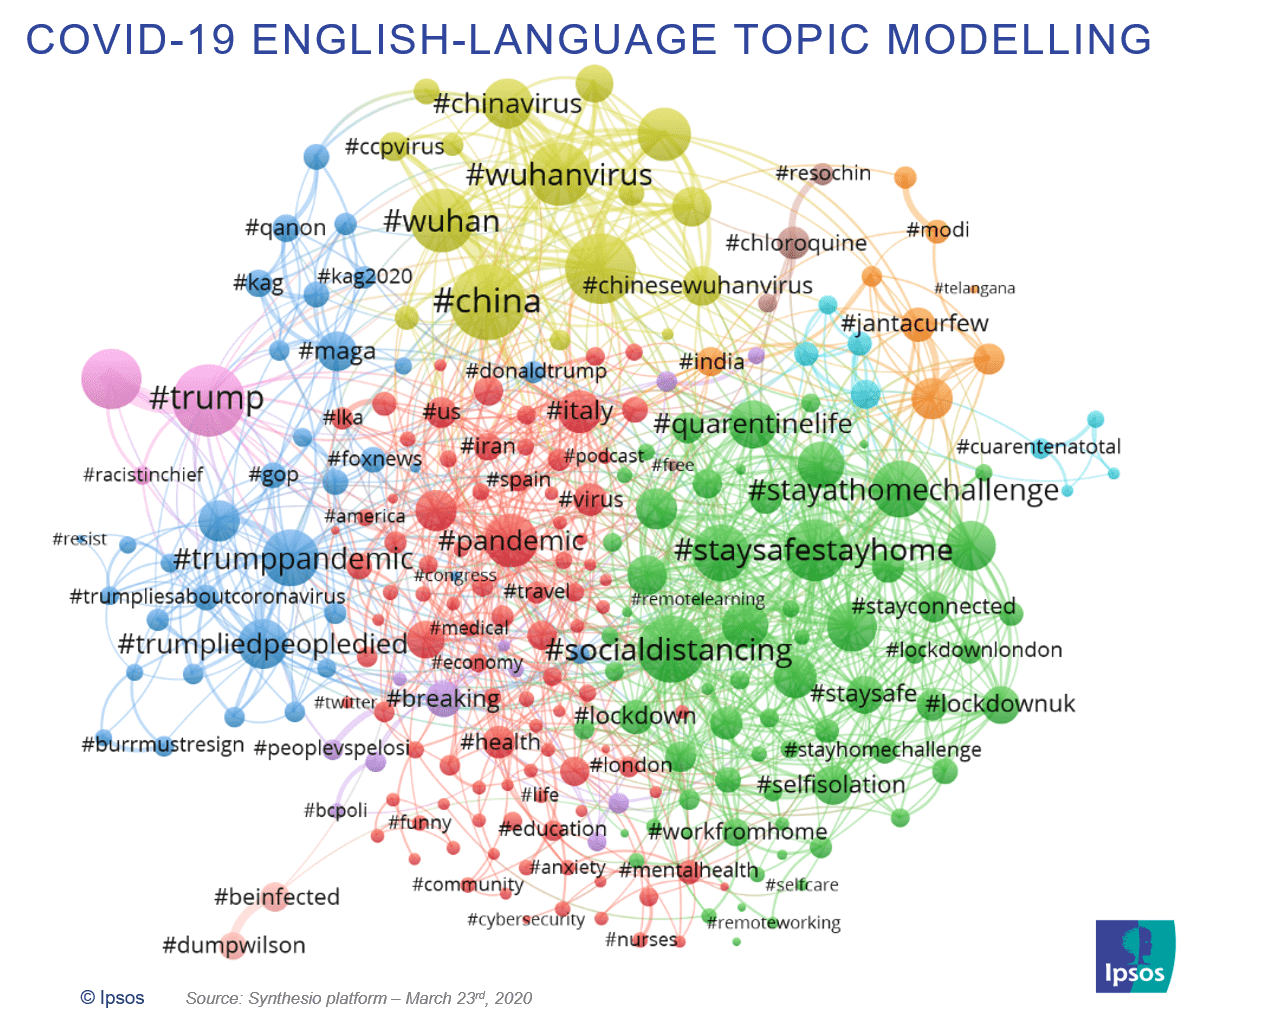 COVID-19 English-language topic modelling on Twitter | Ipsos | Synthesio